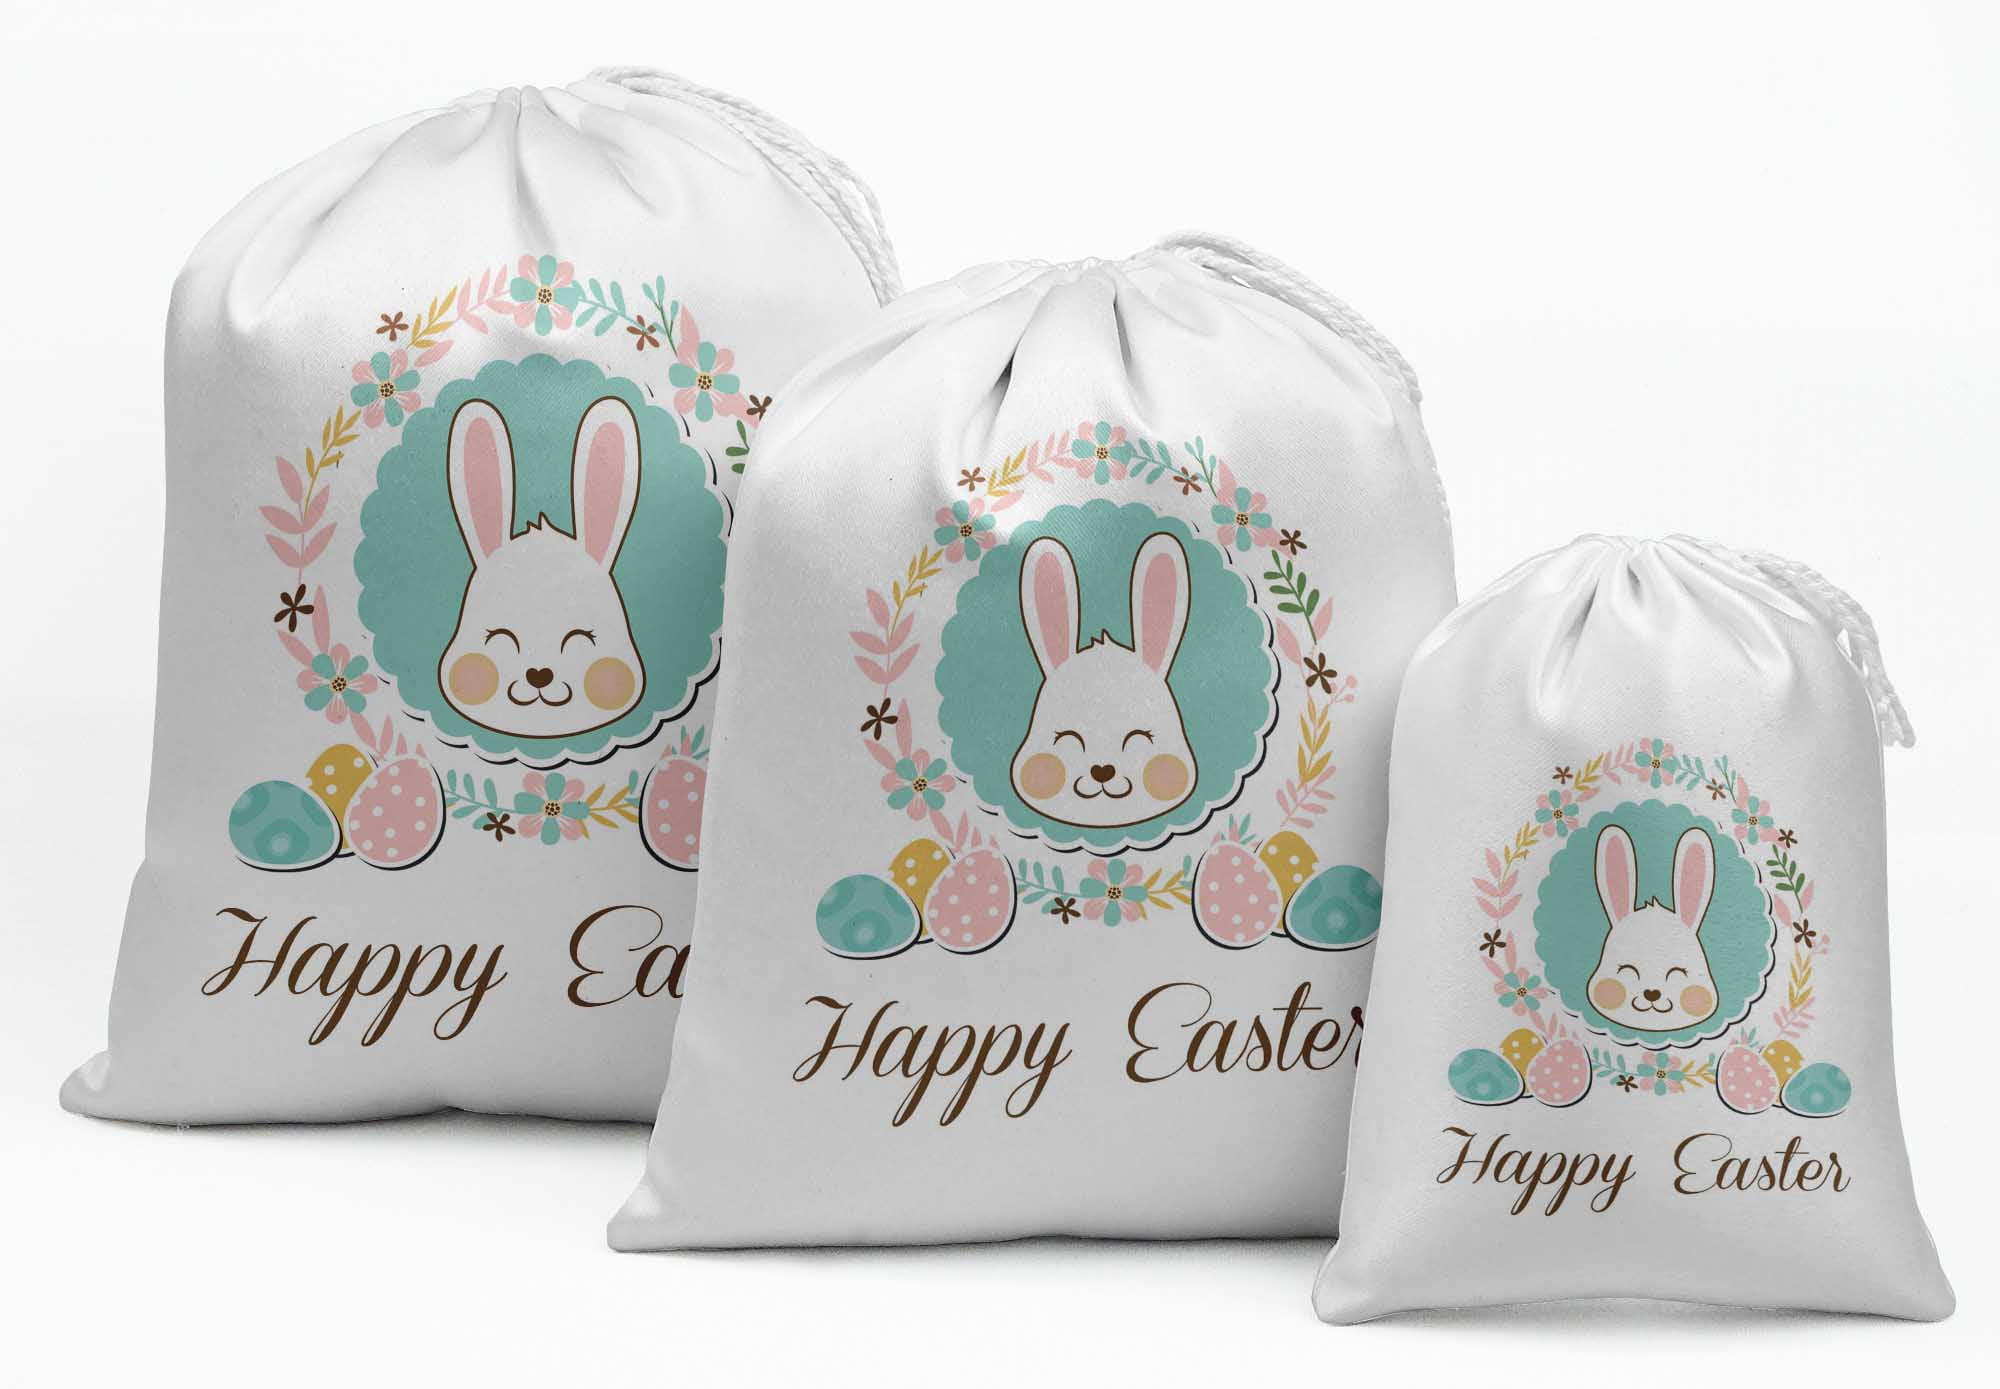 Details about   Bunny Ear Rabbit Candy Bag Biscuit Package Easter Rabbit Cookie Bag 